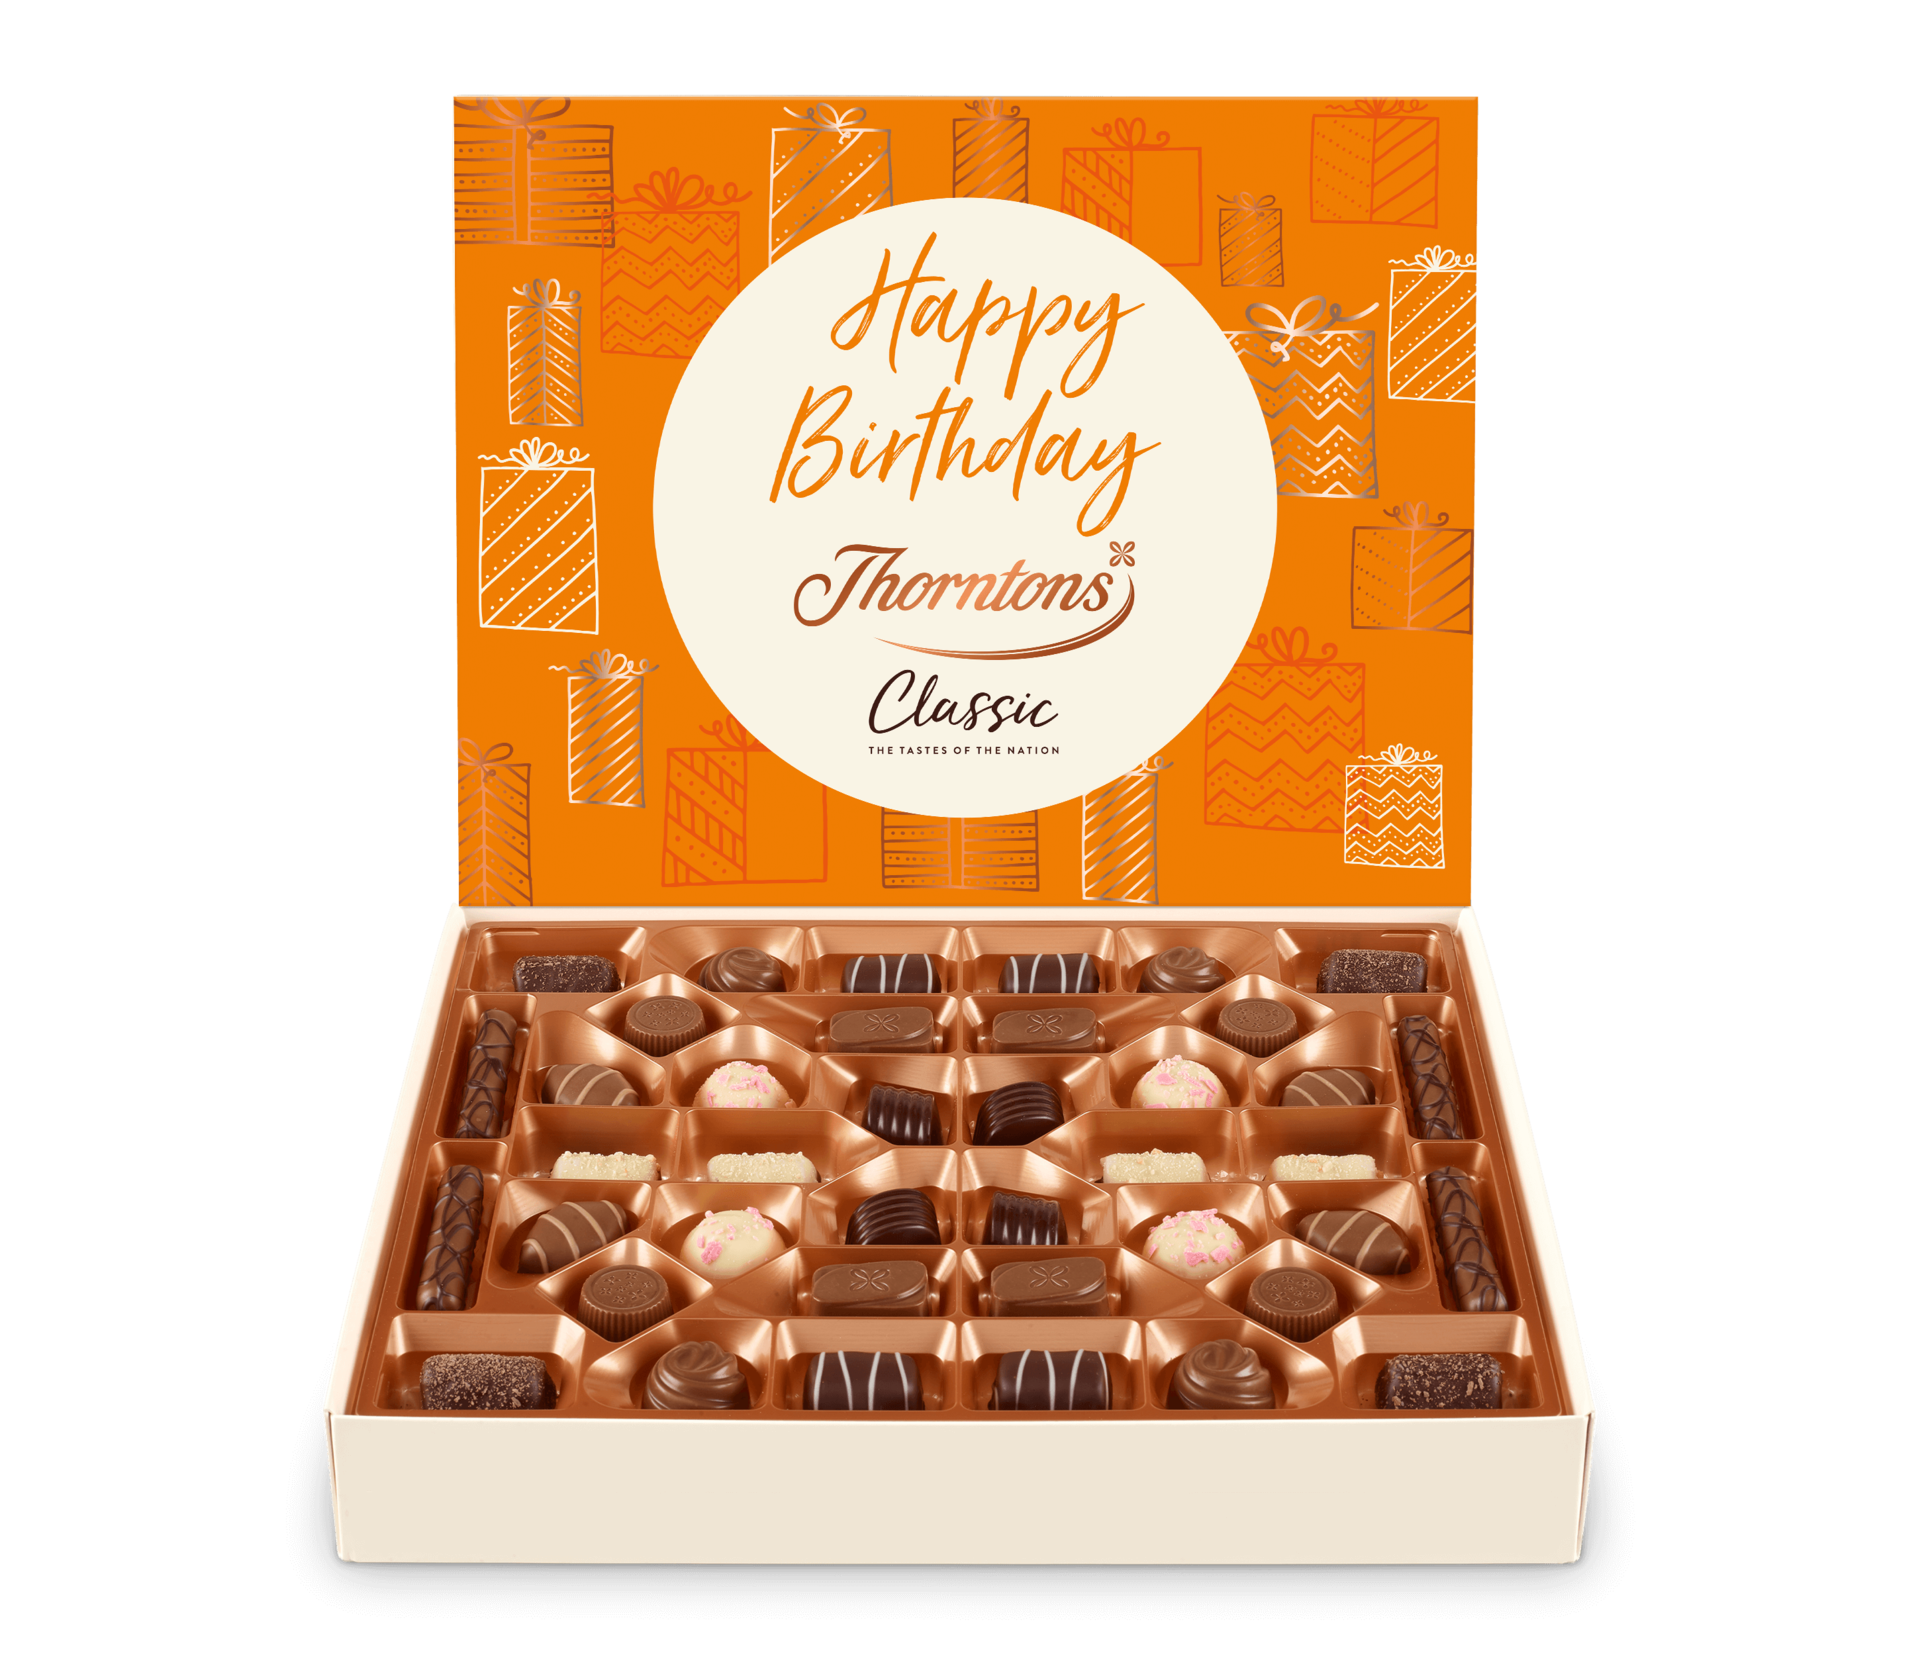 https://www.thorntons.com/medias/sys_master/images/h13/h96/9761153450014/77229504_main_NEW/77229504-main-NEW.png?resize=ProductGridComponent